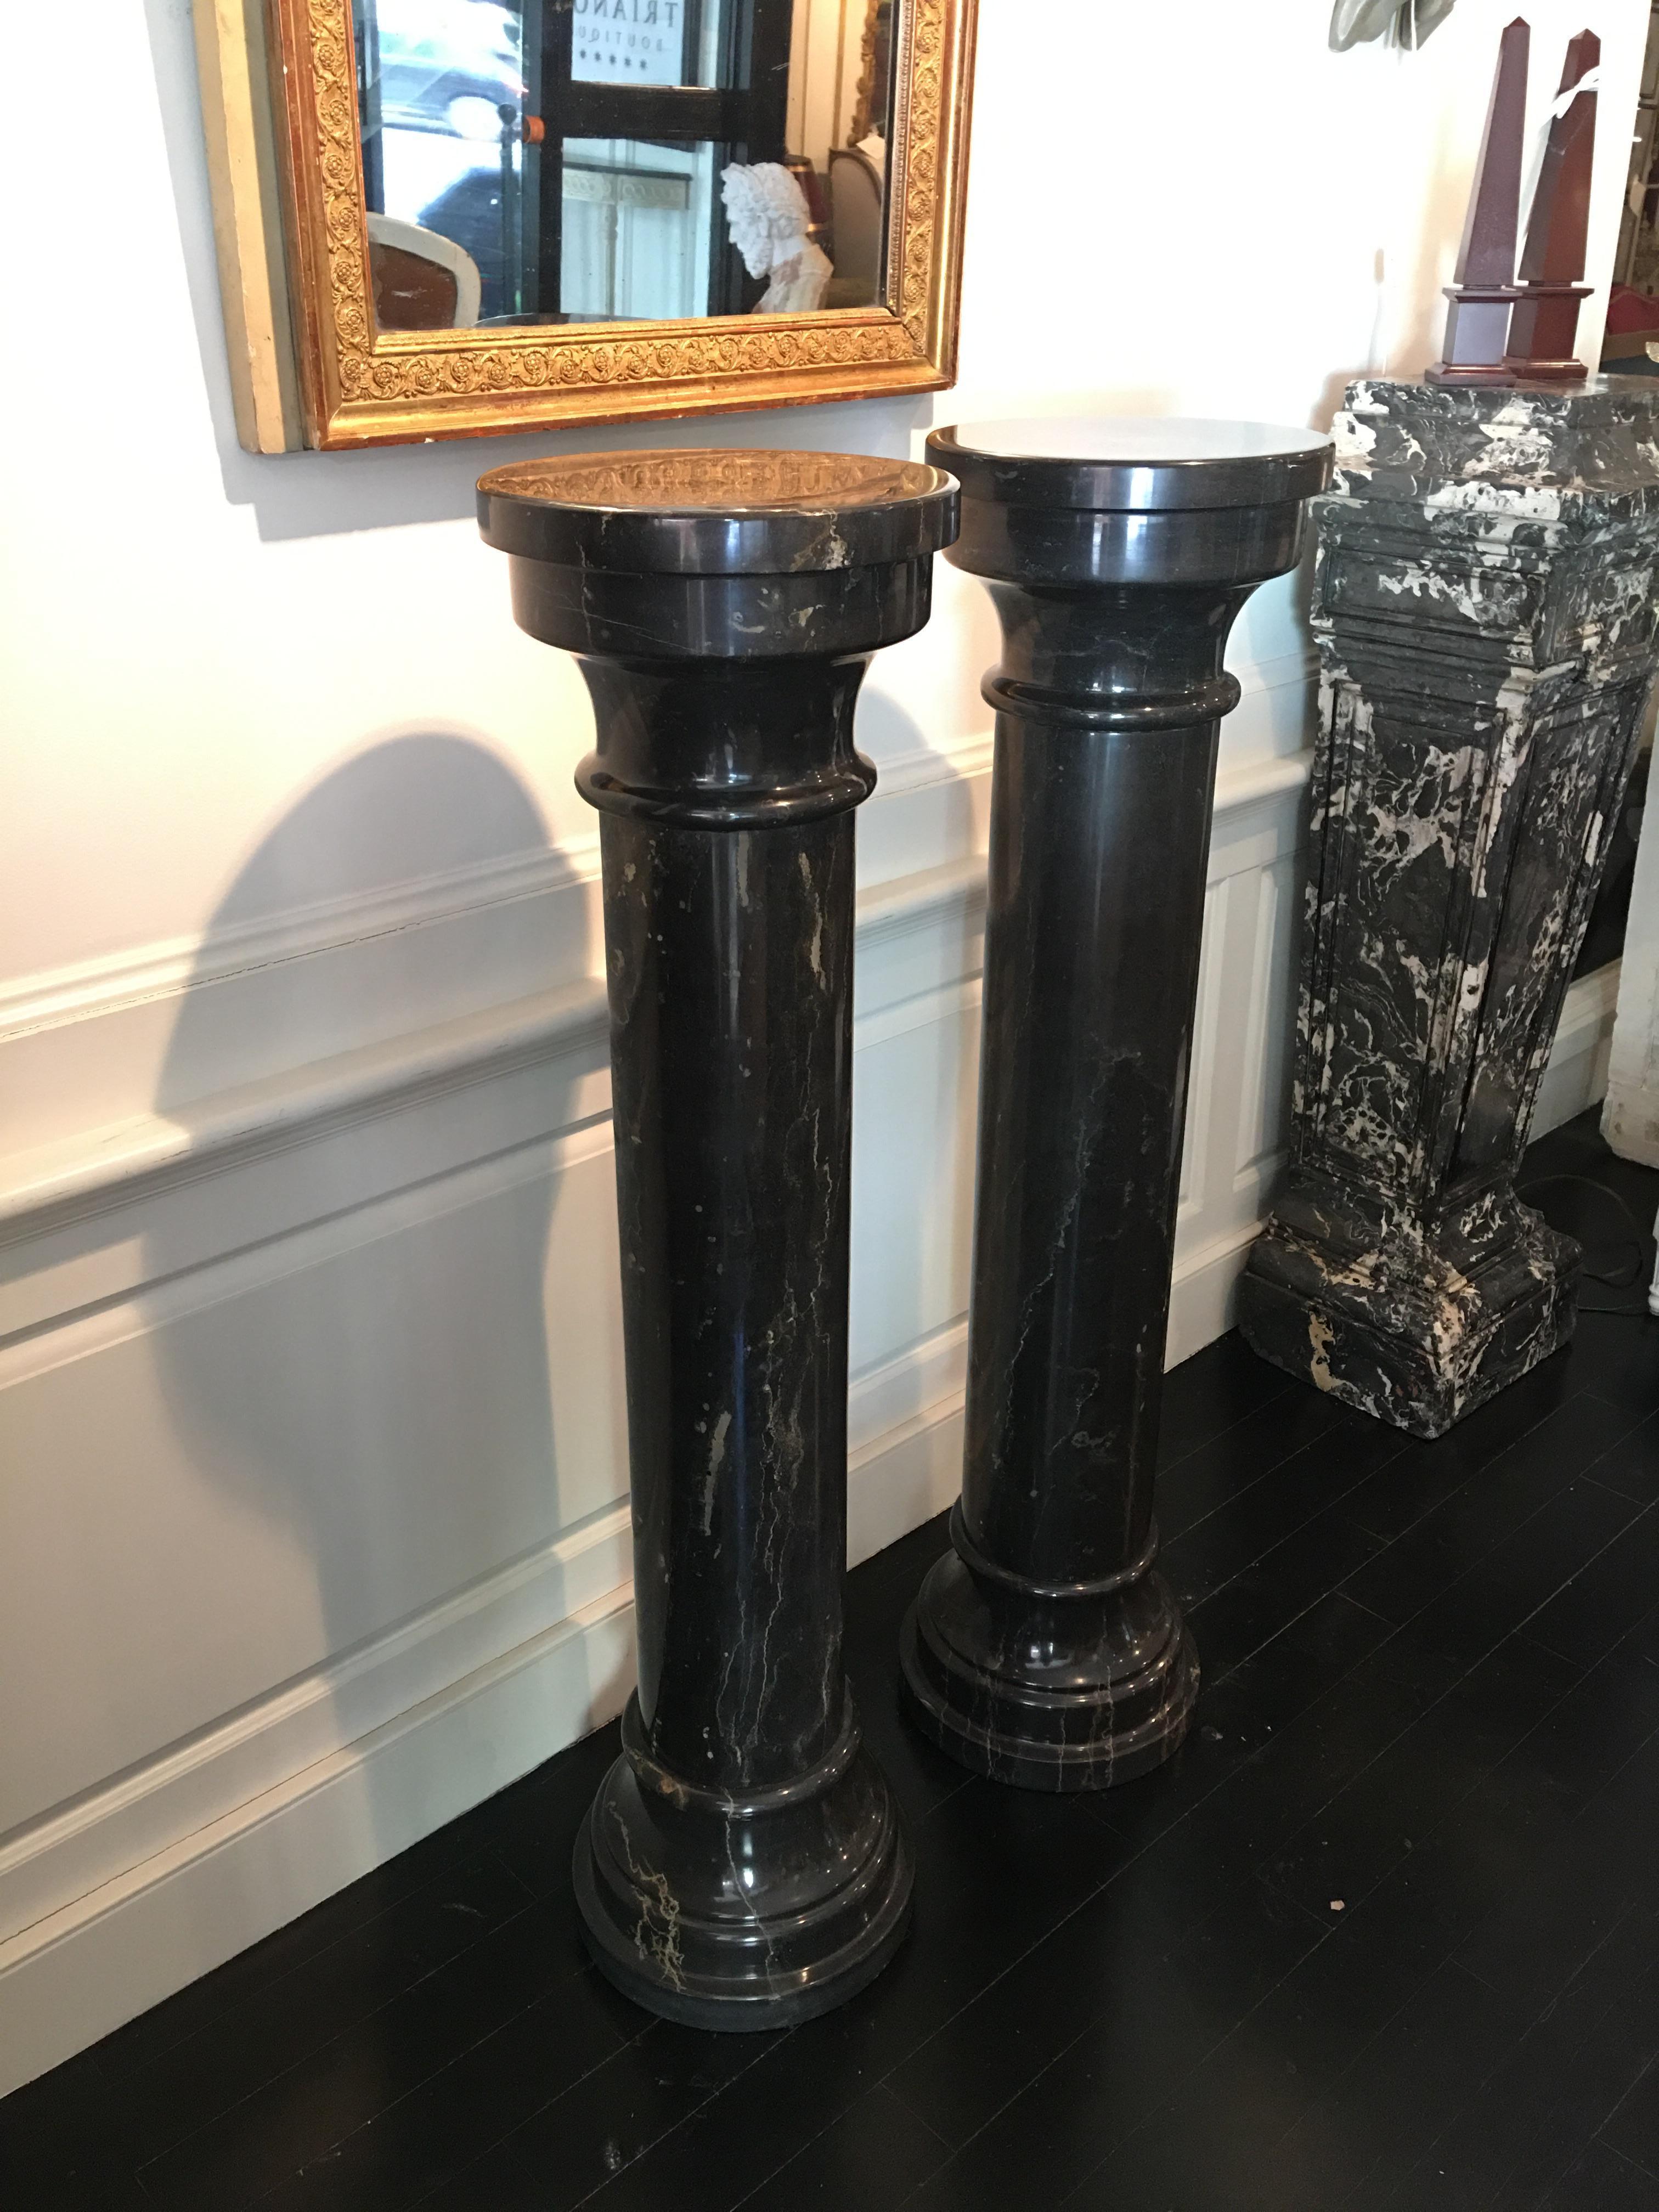 French black marble column
For a chic interior, classical lines with the chic of Hollywood Regency.
One column has been sold. One column remains available.